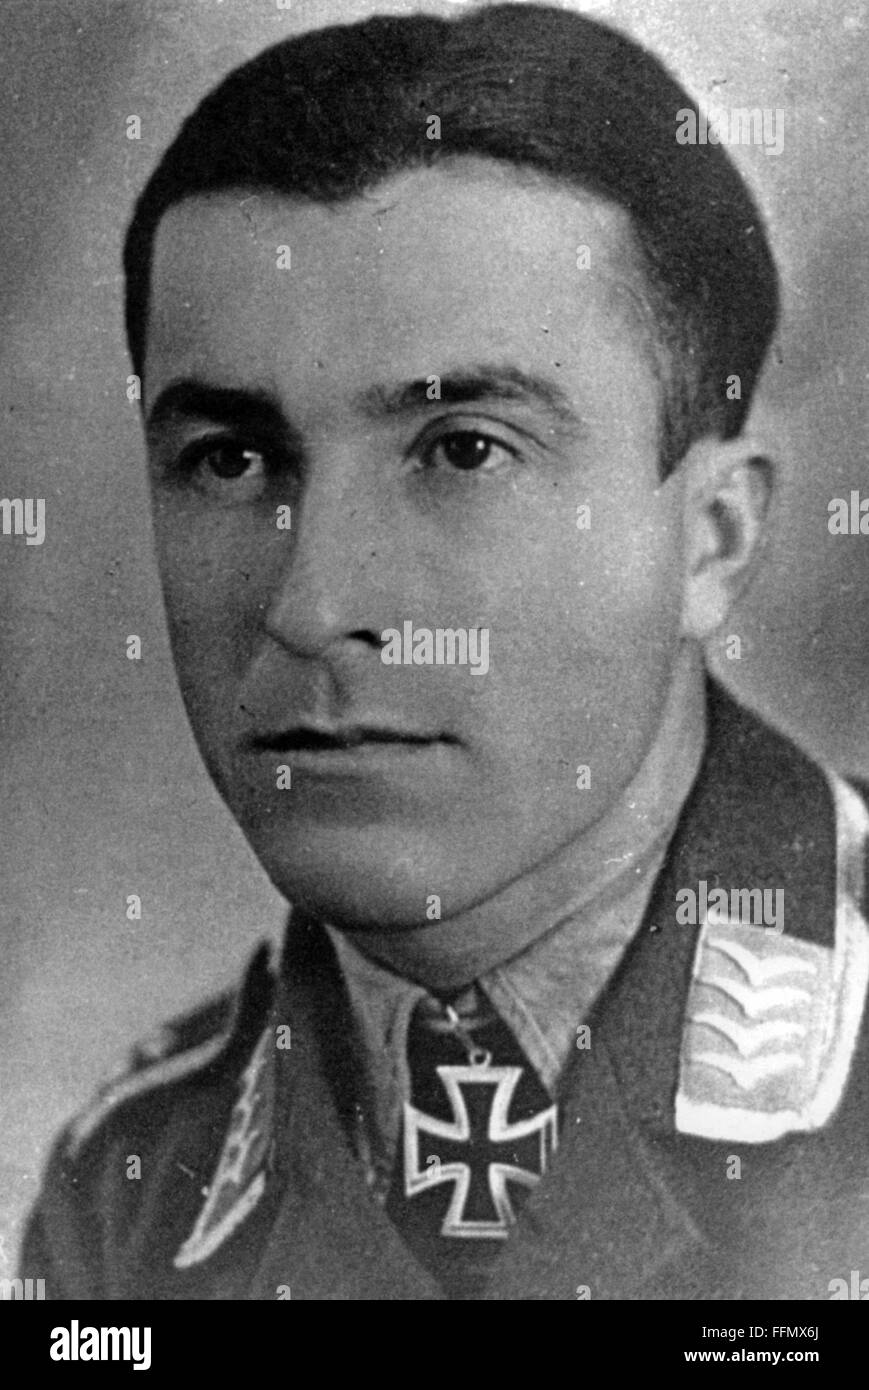 Kittel, Otto 'Bruno', 21.2.1917 - 16.2.1945, German fighter pilot, portrait, as master sergeant in the Fighter Wing 54, late 1943, Stock Photo